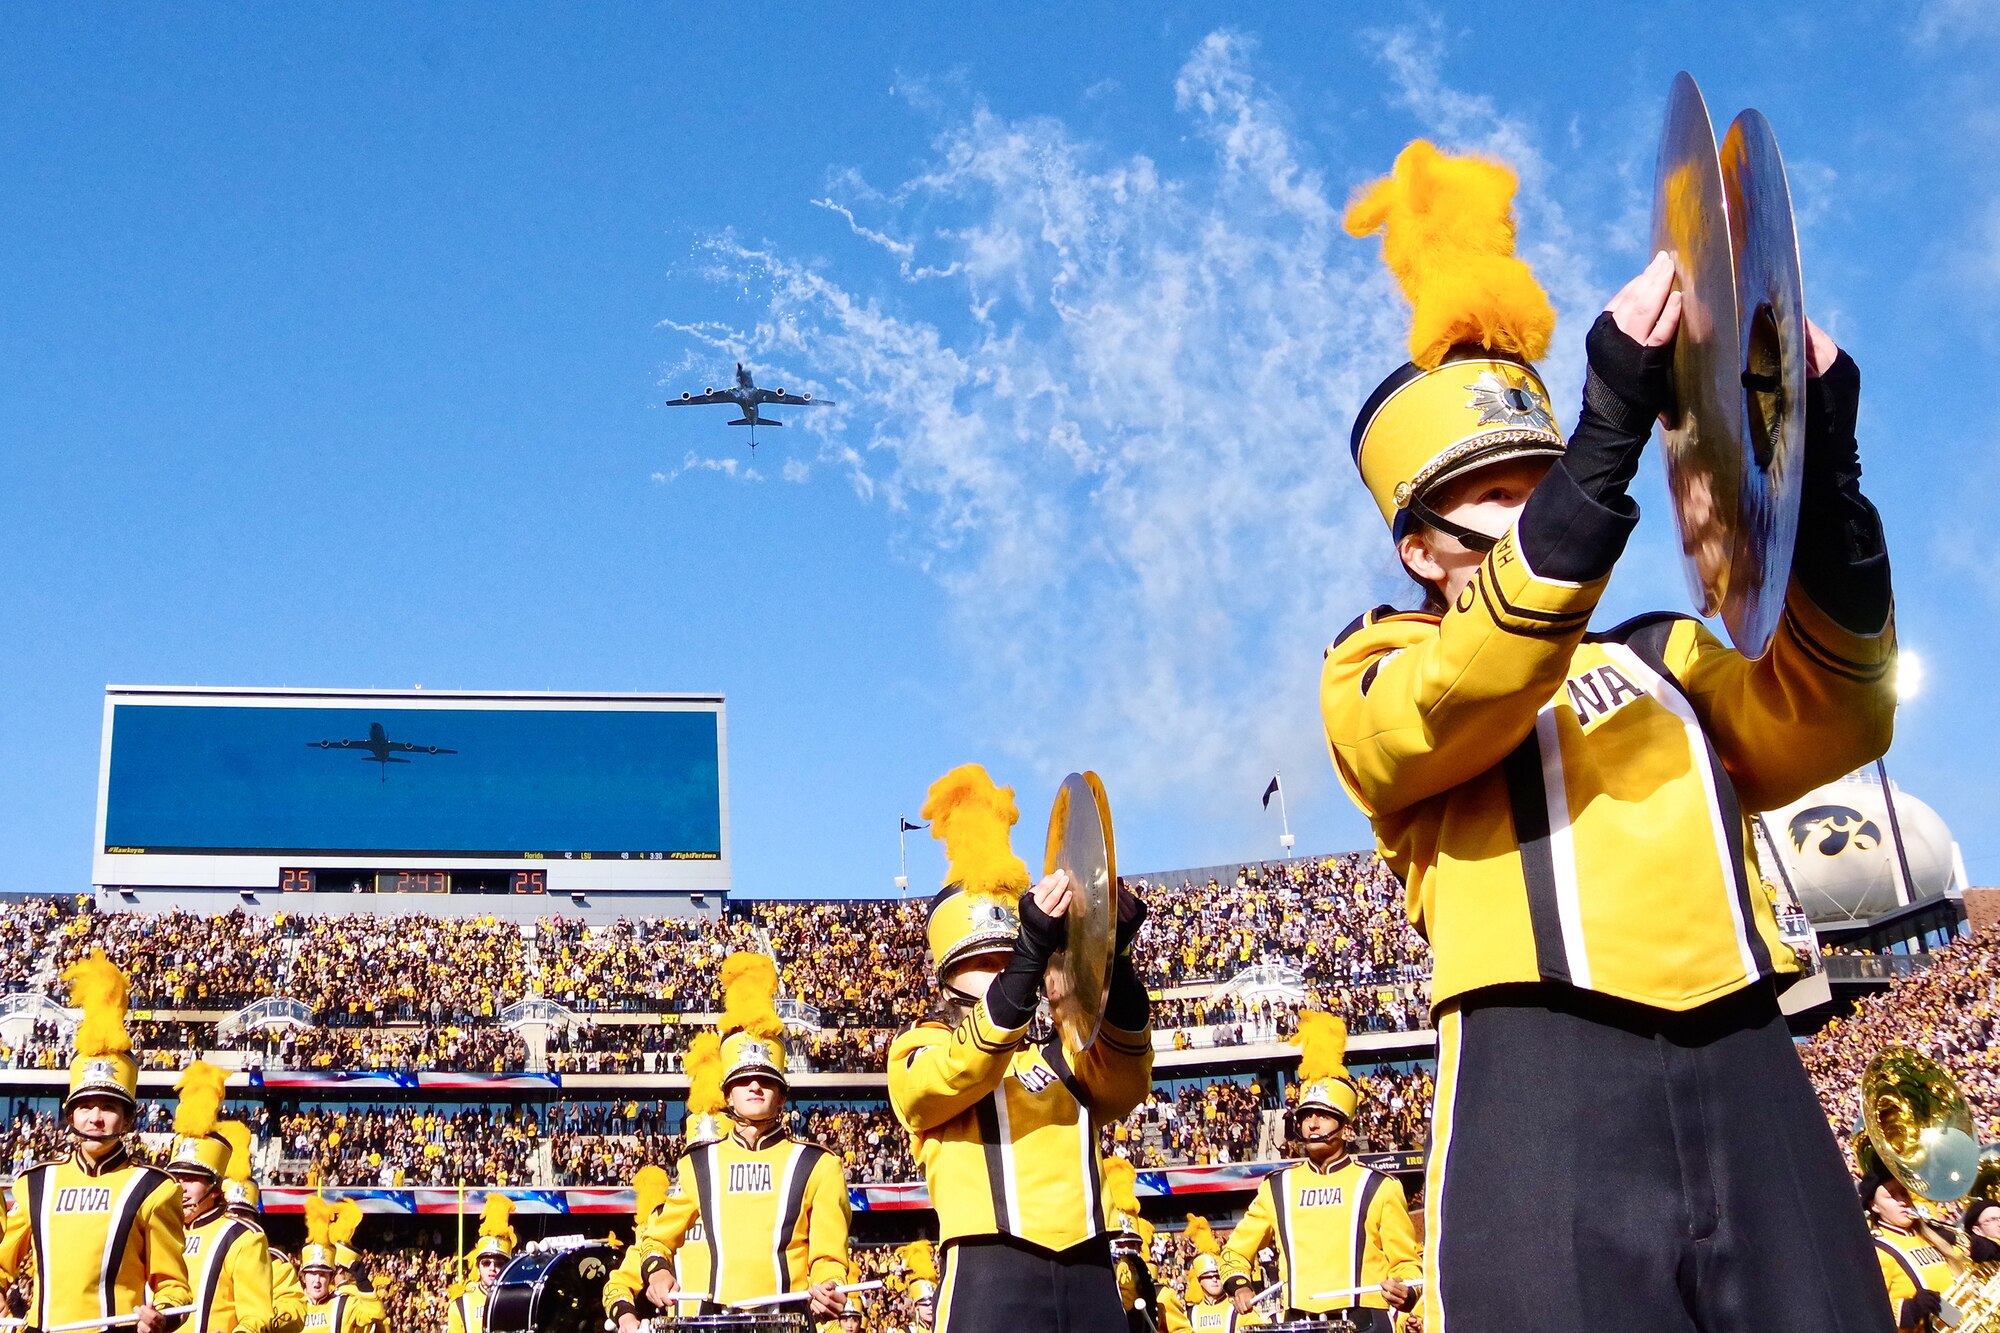 U.S. Air Force KC-135 performing a flyover of Kinnick Stadium